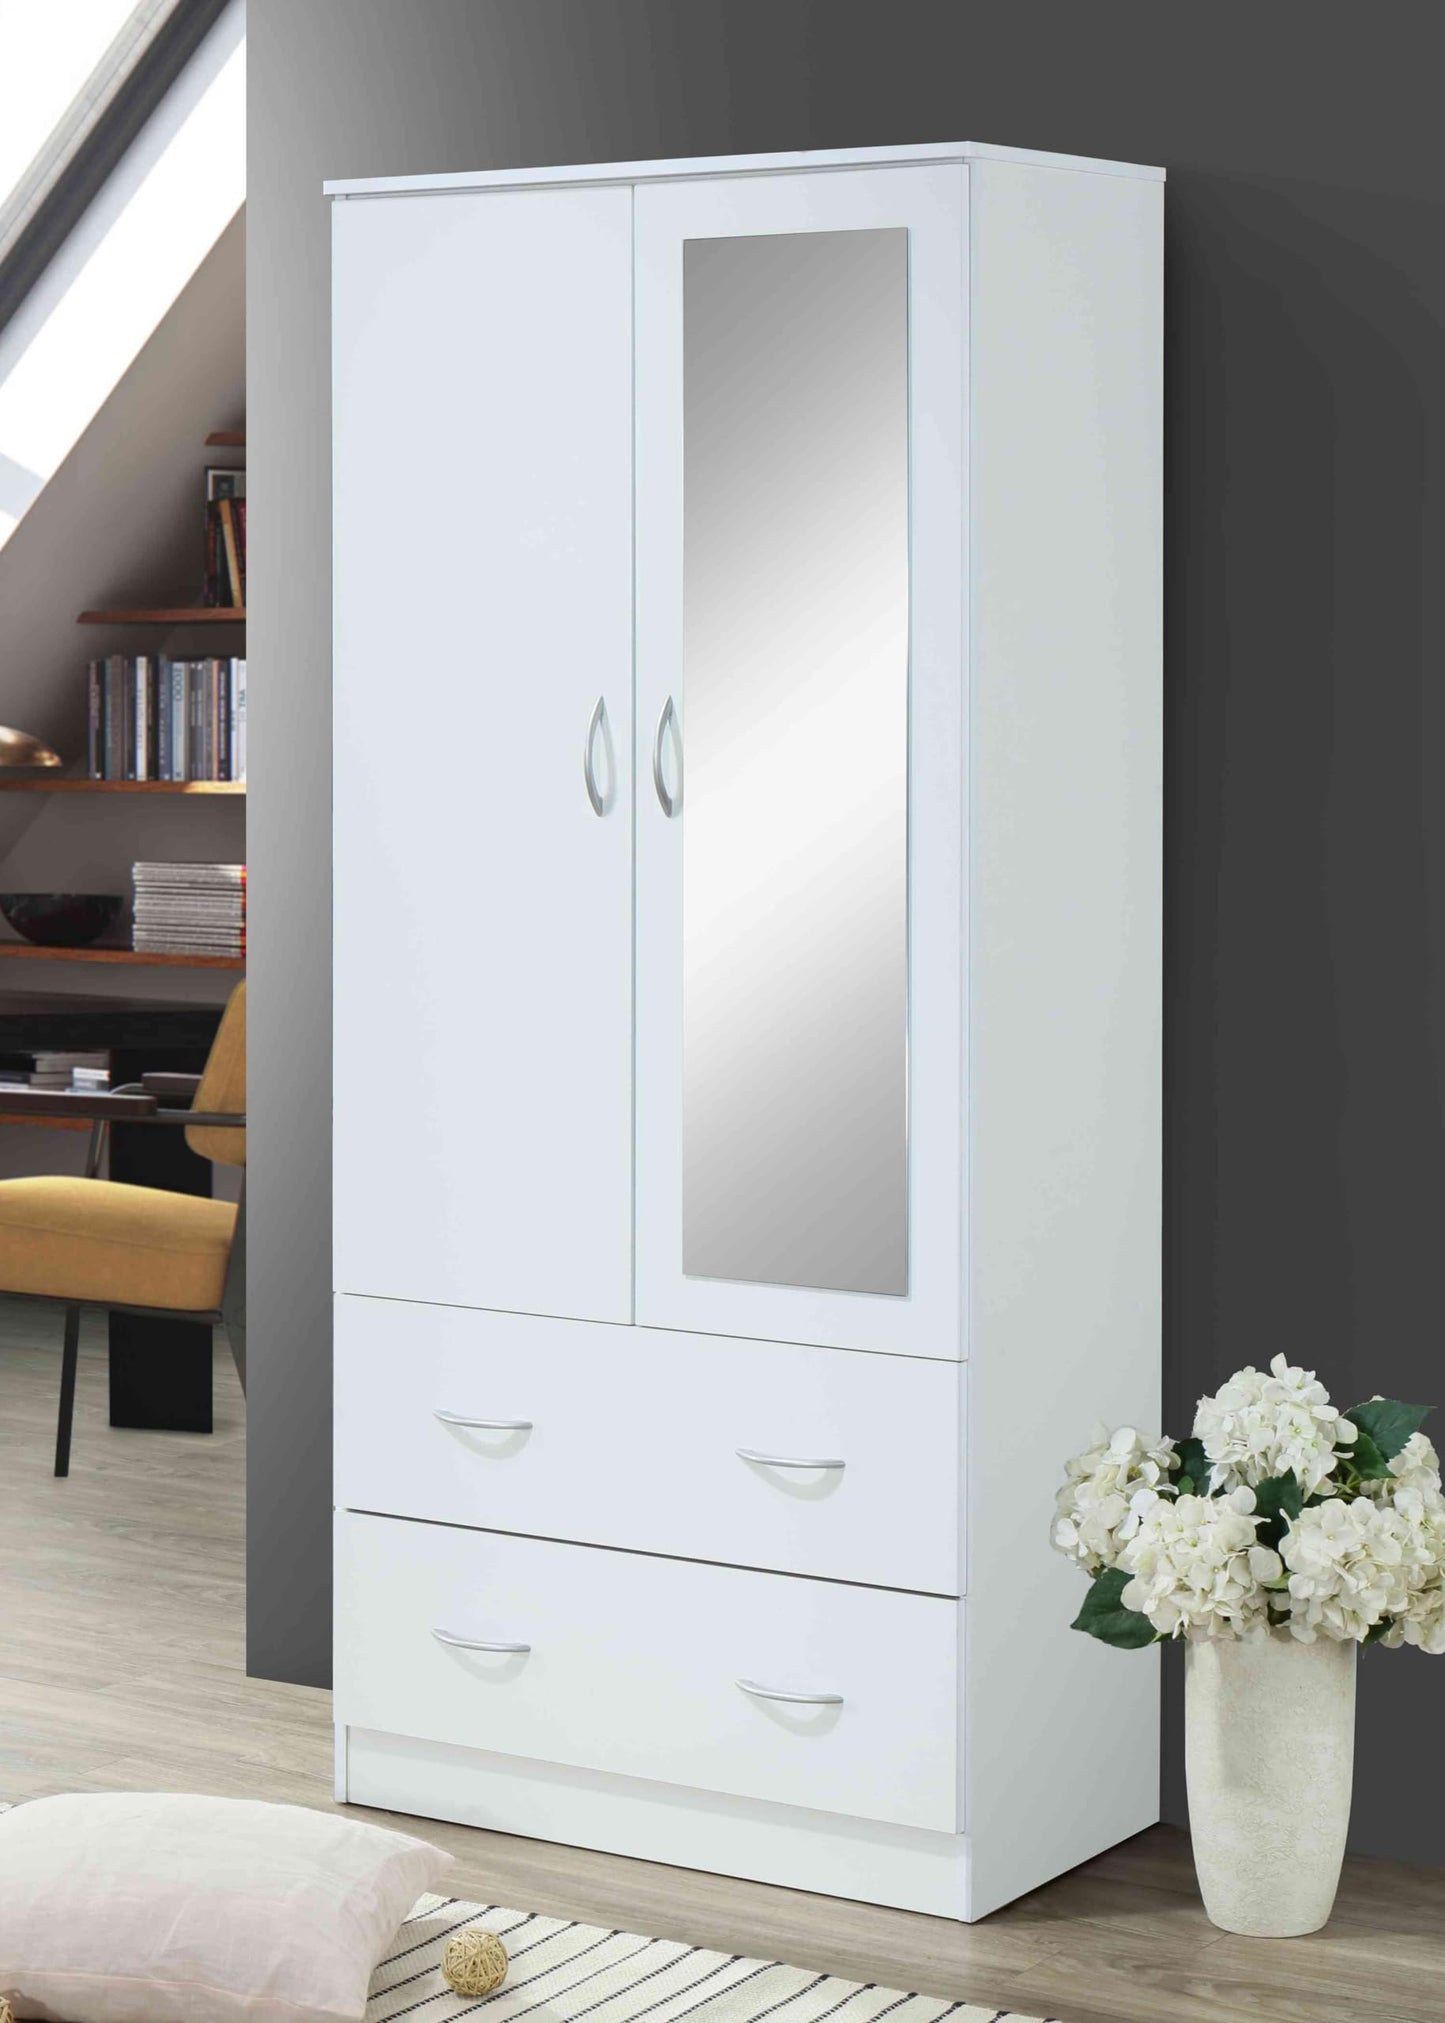 HODEDAH 2 Door Wood Wardrobe Bedroom Closet with Clothing Rod inside Cabinet, 2 Drawers for Storage and Mirror, White